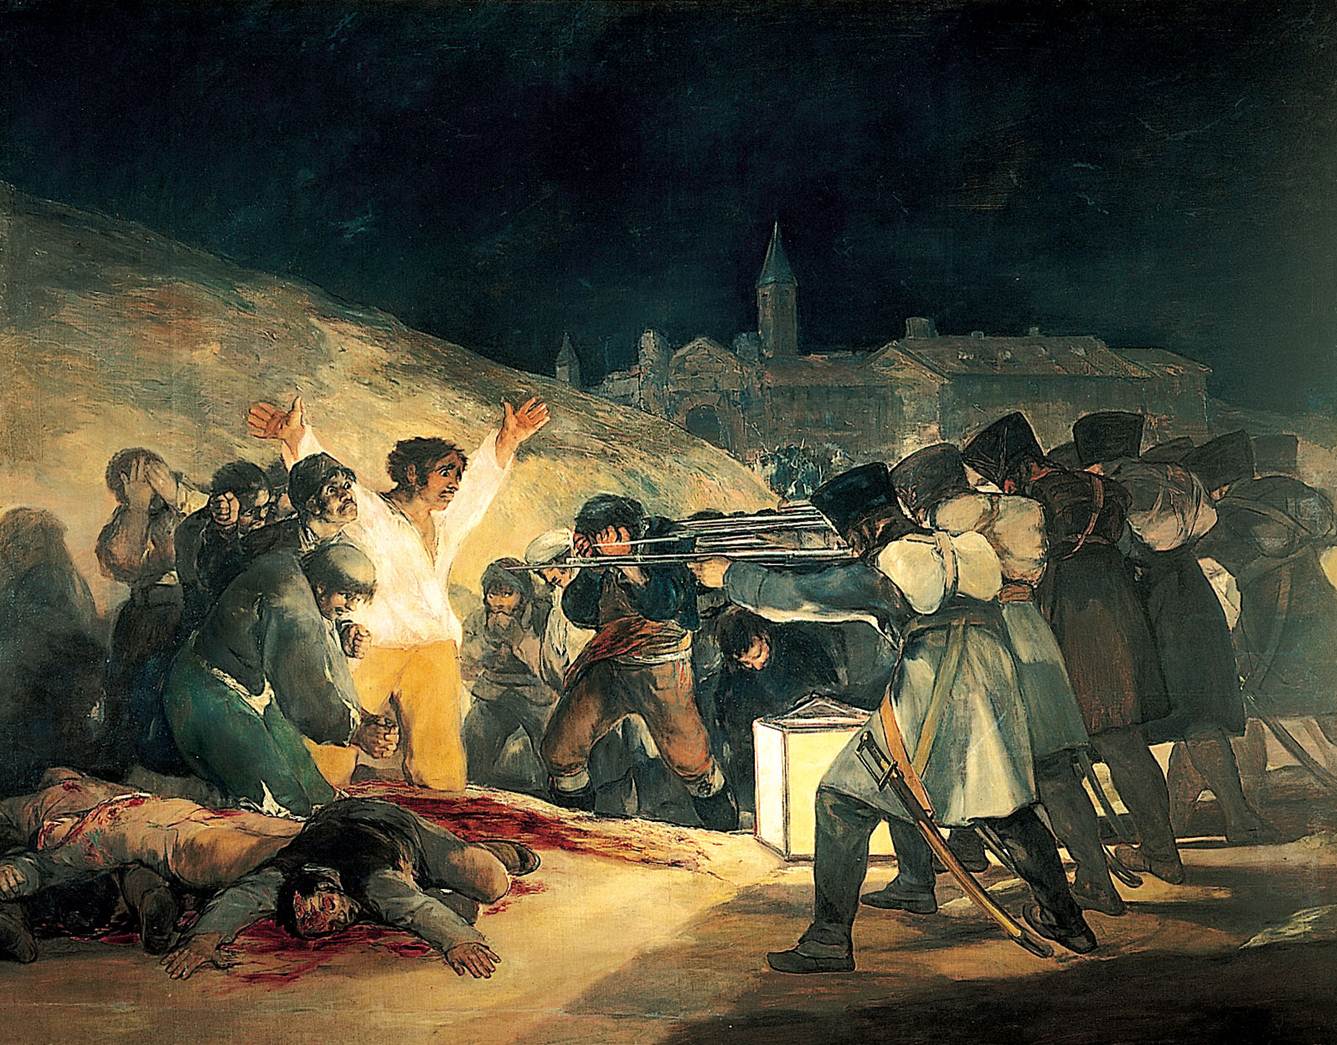 Francisco Goya, The Third of May 1808 in Madrid or "The Executions", oil on canvas, 1814 (Museo del Prado, Madrid). Photo by KCC246F, CC BY-ND 2.0.